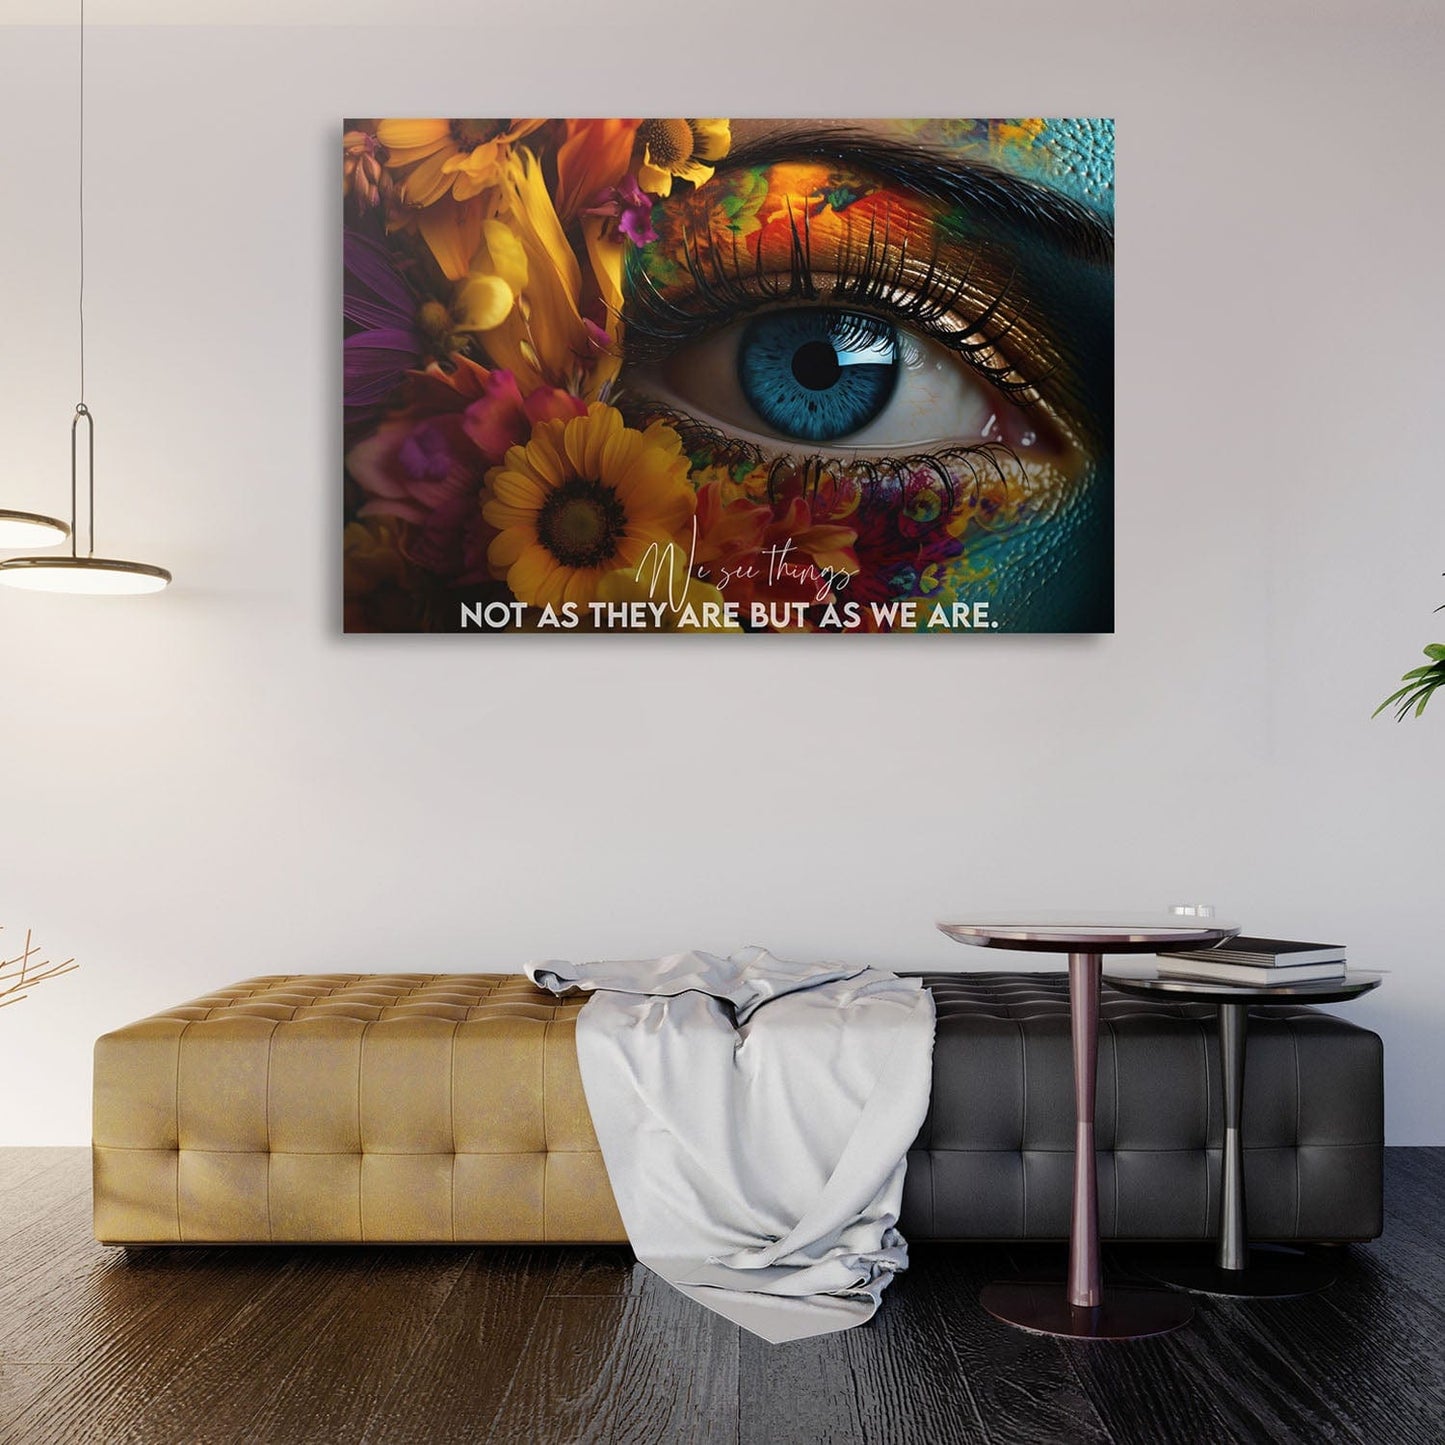 We See Things Not as They Are But as We Wall Art | Inspirational Wall Art Motivational Wall Art Quotes Office Art | ImpaktMaker Exclusive Canvas Art Landscape